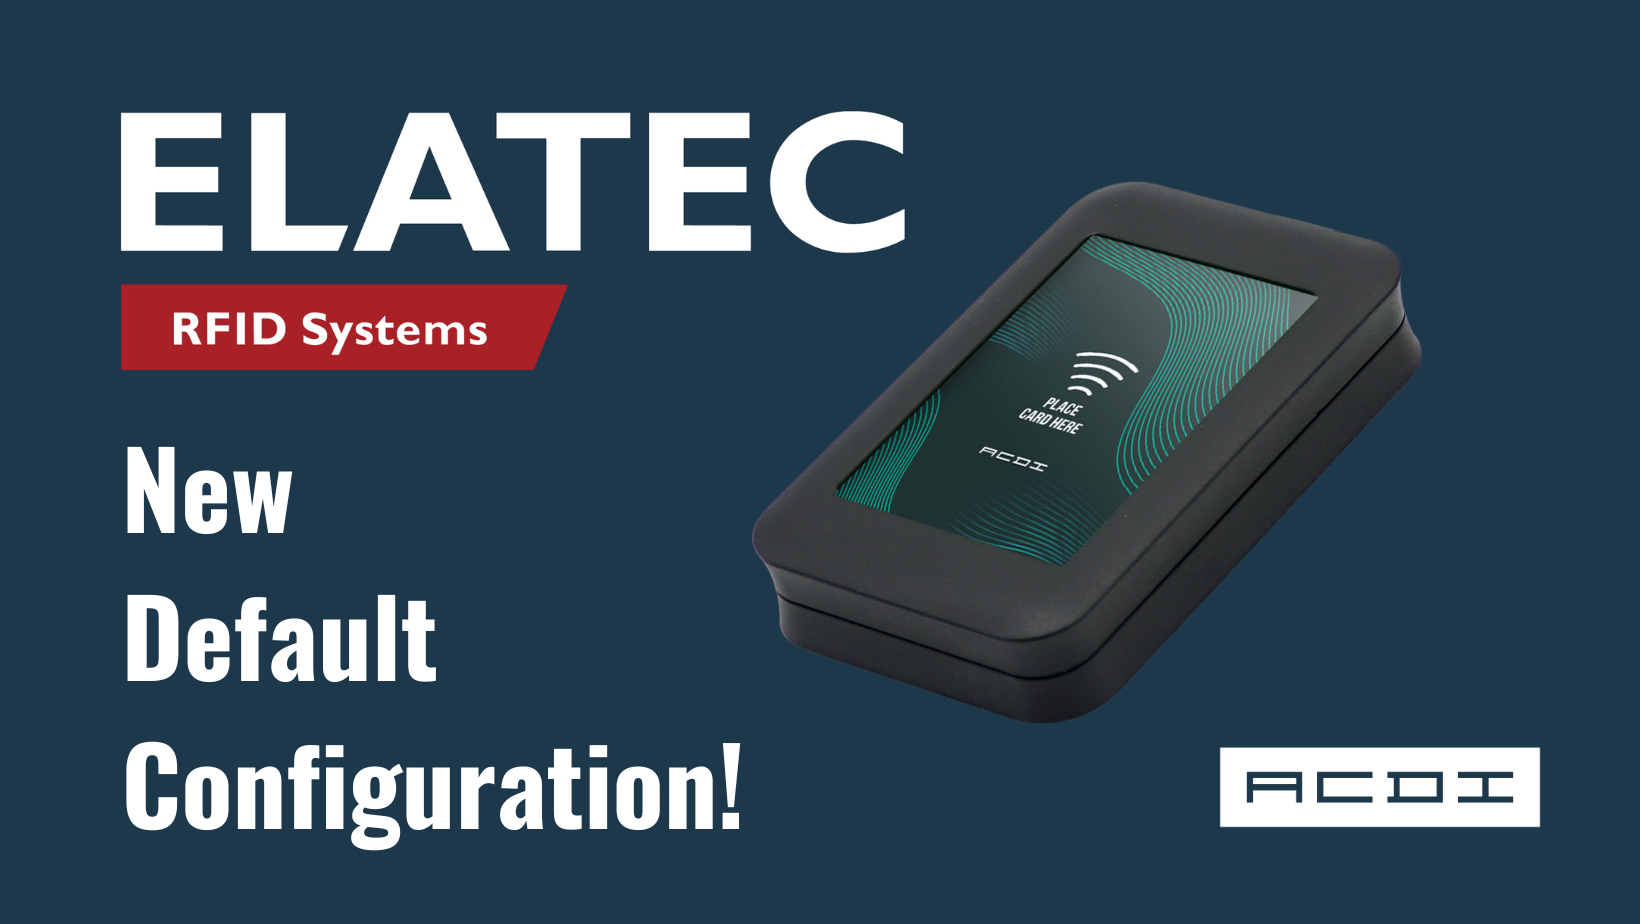 ACDI and ELATEC Announce New Default Configuration for Card Readers